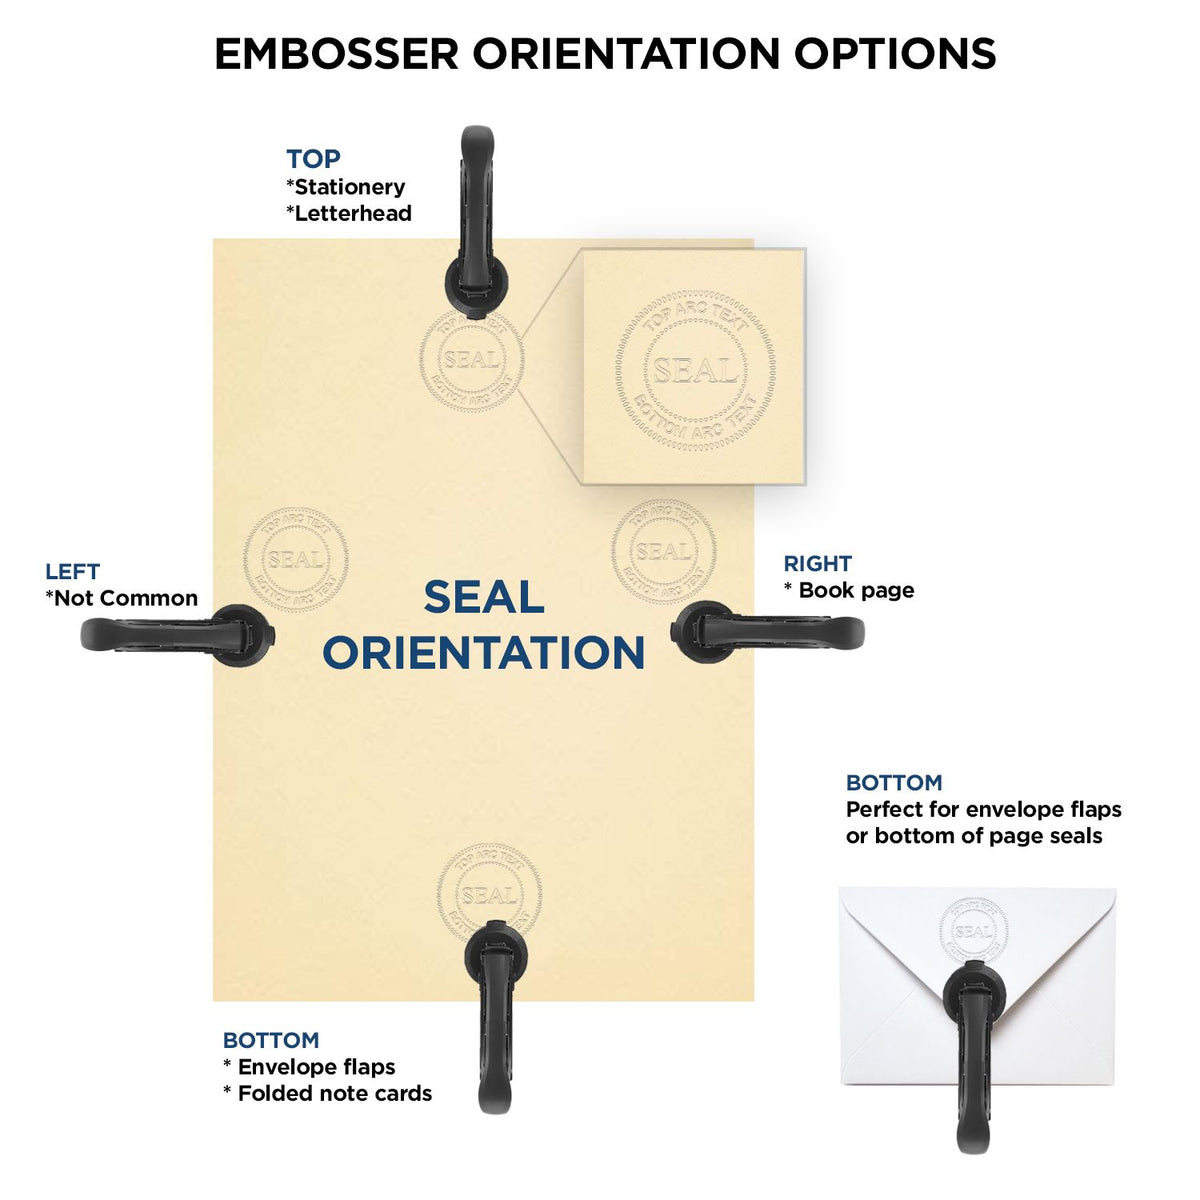 An infographic for the Hybrid Washington Architect Seal showing embosser orientation, this is showing examples of a top, bottom, right and left insert.